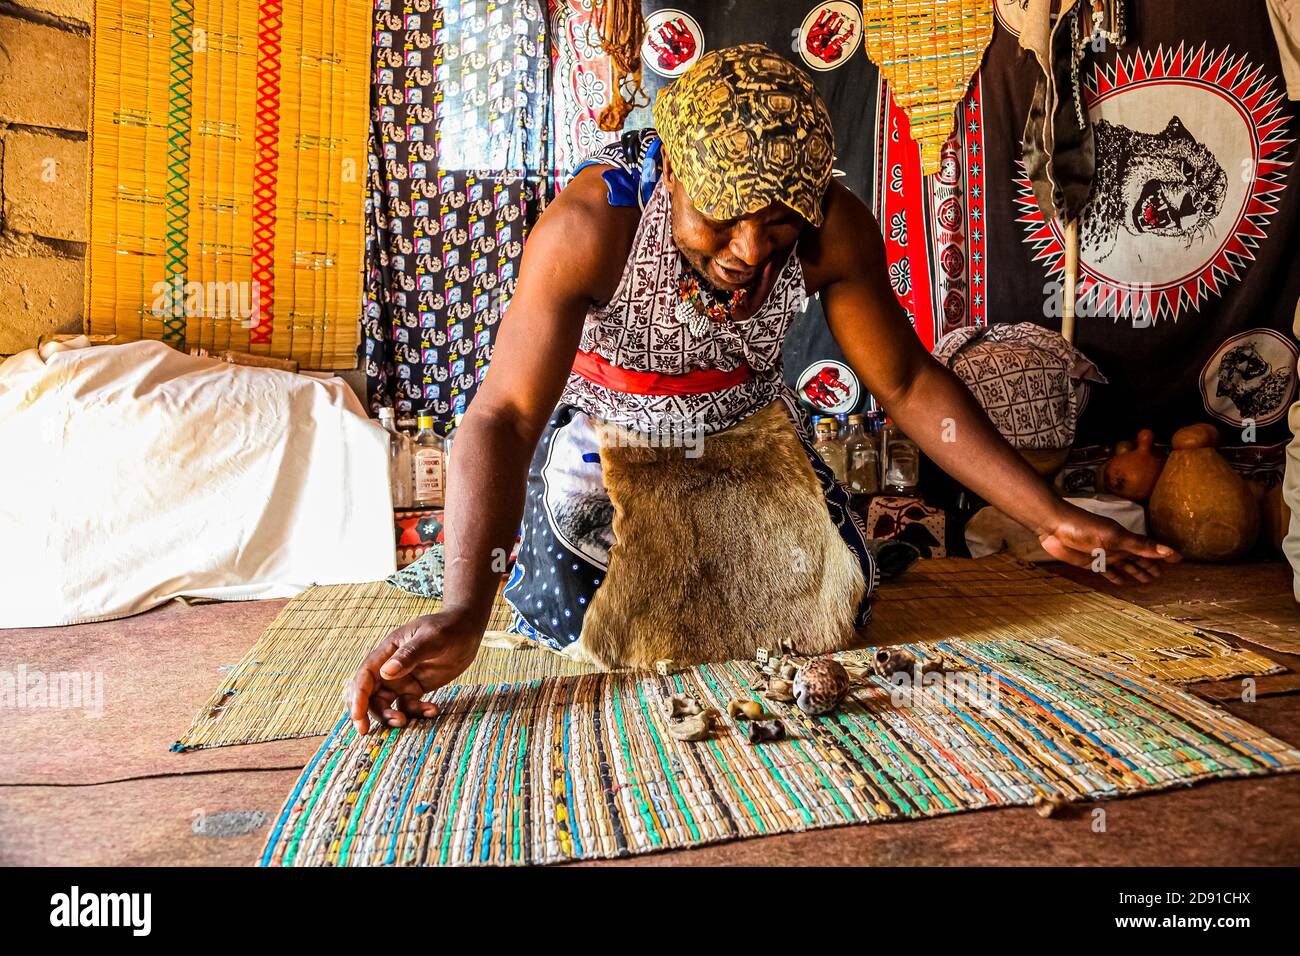 Sabi Sabi, South Africa - May 5, 2012: African Male Traditional Healer known as a Sangoma or witch-doctor performing a spiritual reading Stock Photo